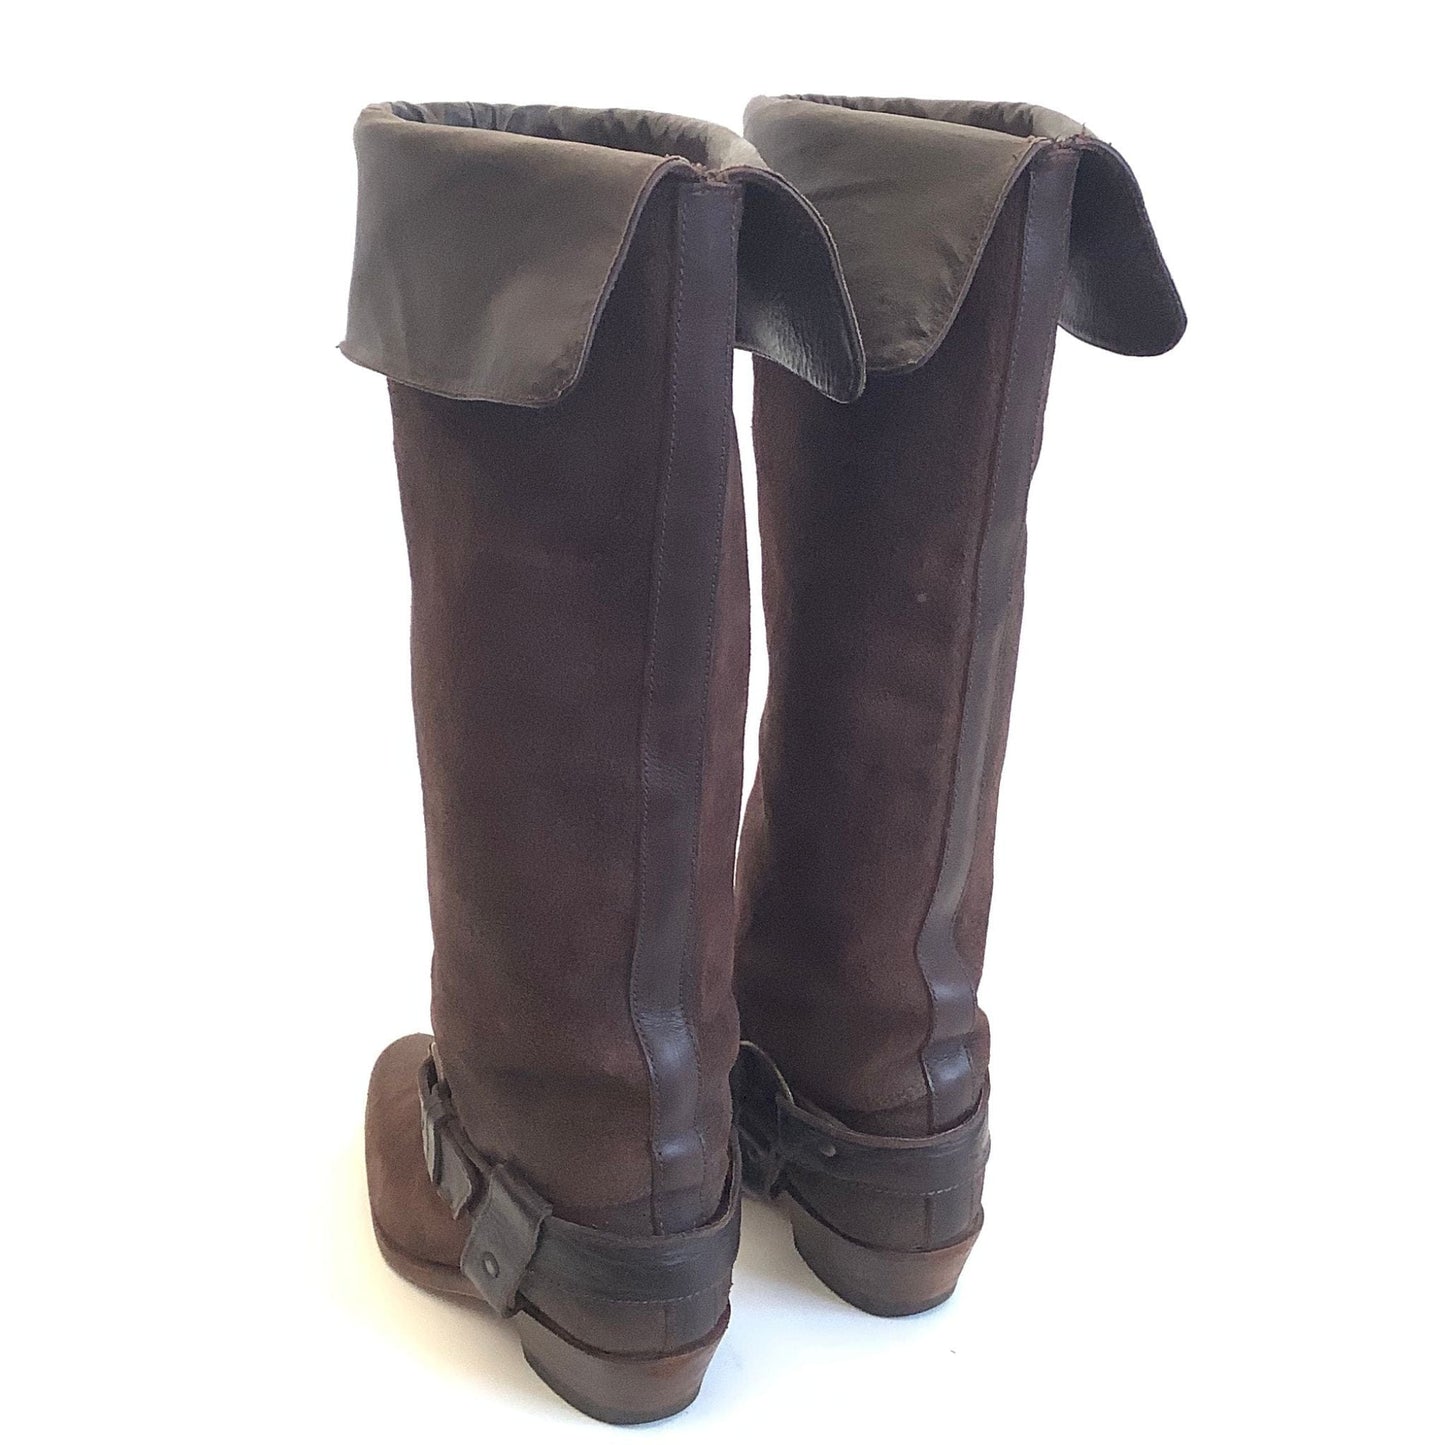 Frye Over The Knee Boots 7 / Brown / Vintage 1990s